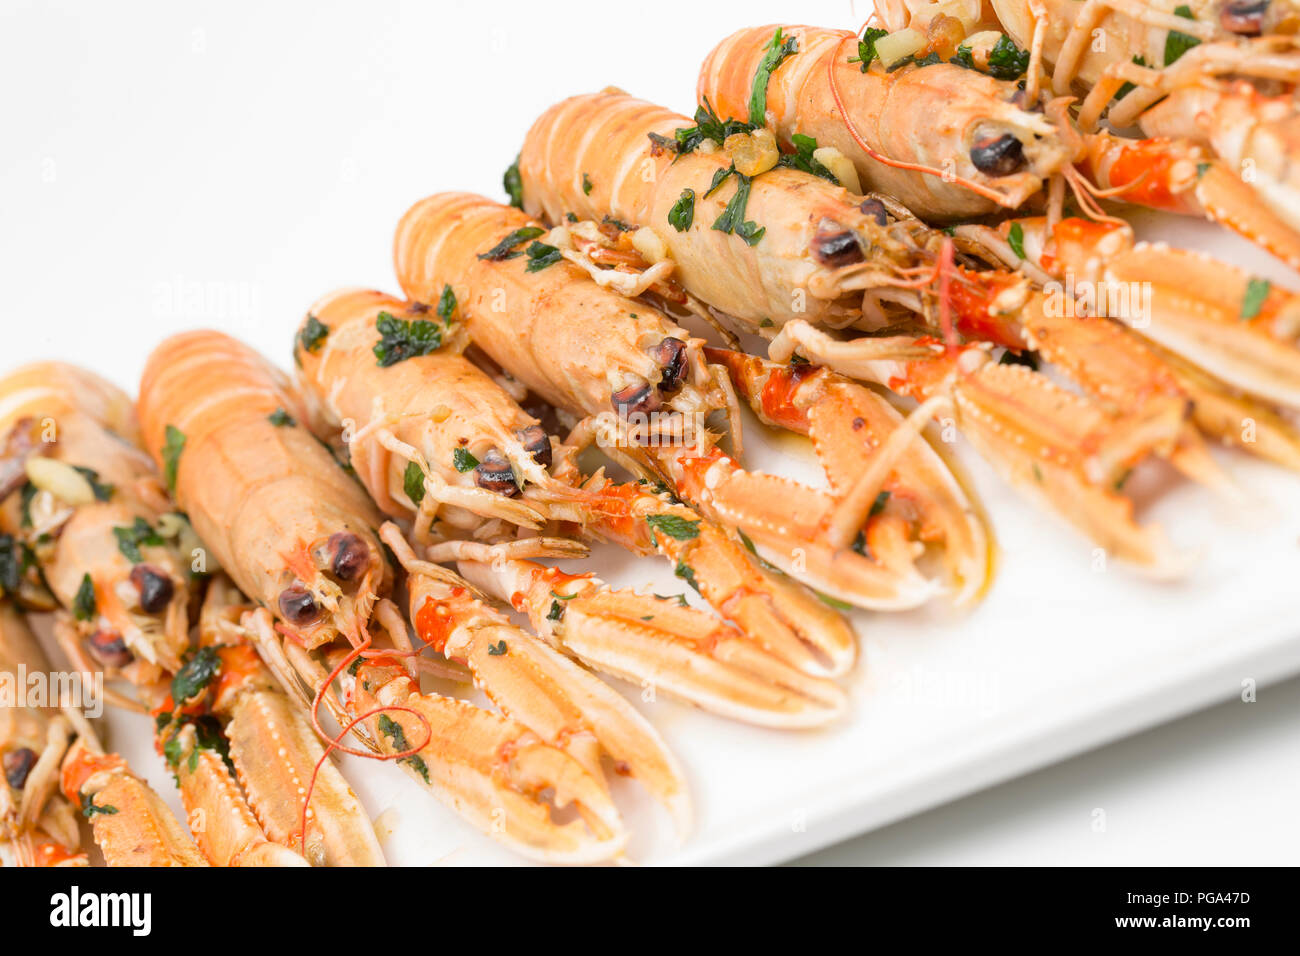 Scottish langoustines, Nephrops norvegicus, bought from a supermarket and photographed on a plate after frying in butter, garlic and parsley. The lang Stock Photo